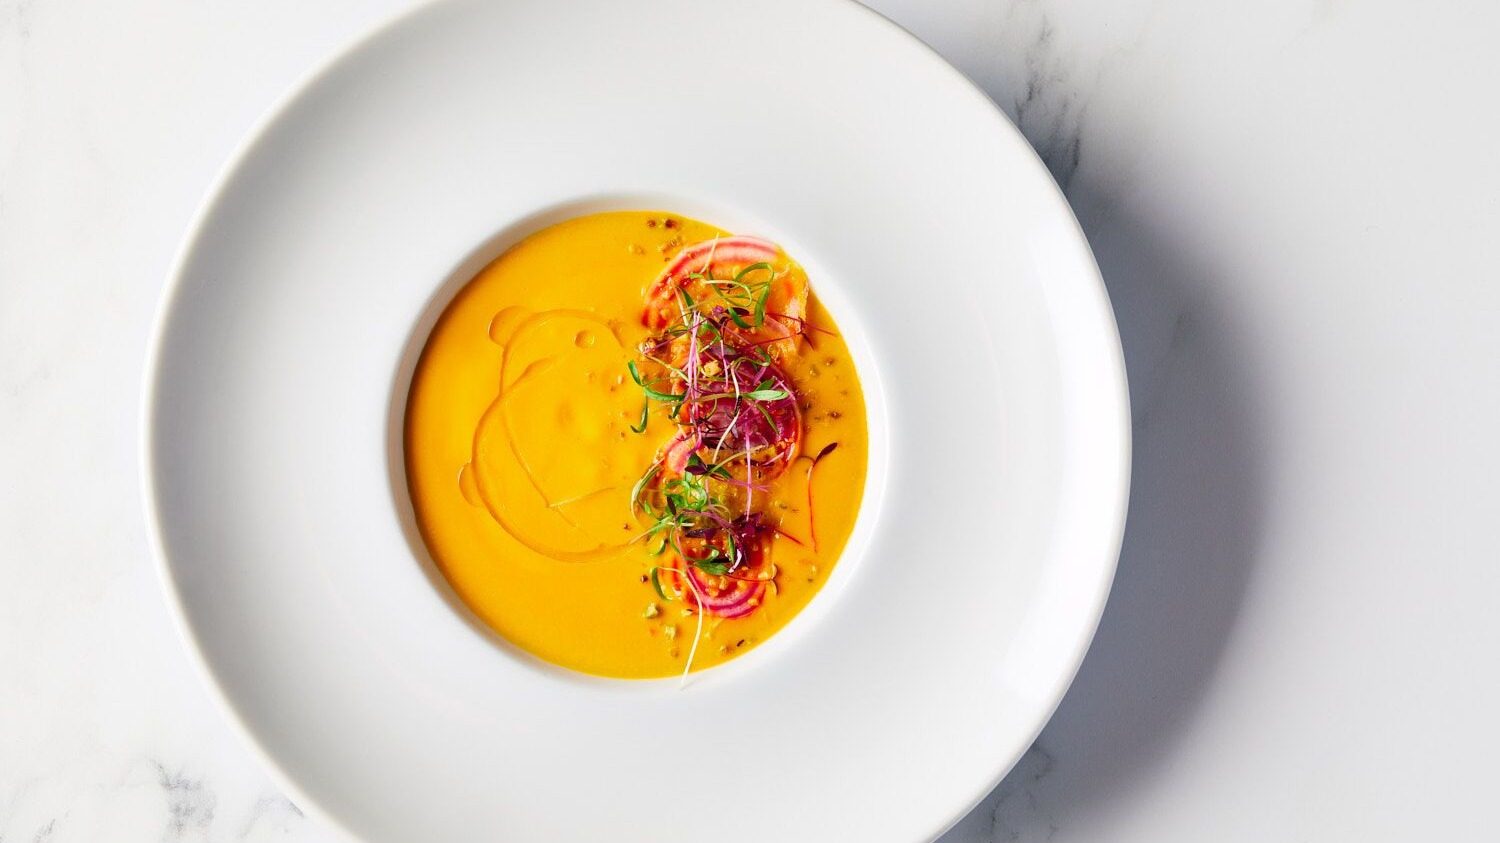 PLANT-BASED. A chilled golden beet soup is on the 100% vegan menu at the 77th Golden Globe Awards. Screenshot from Facebook.com/GoldenGlobes 